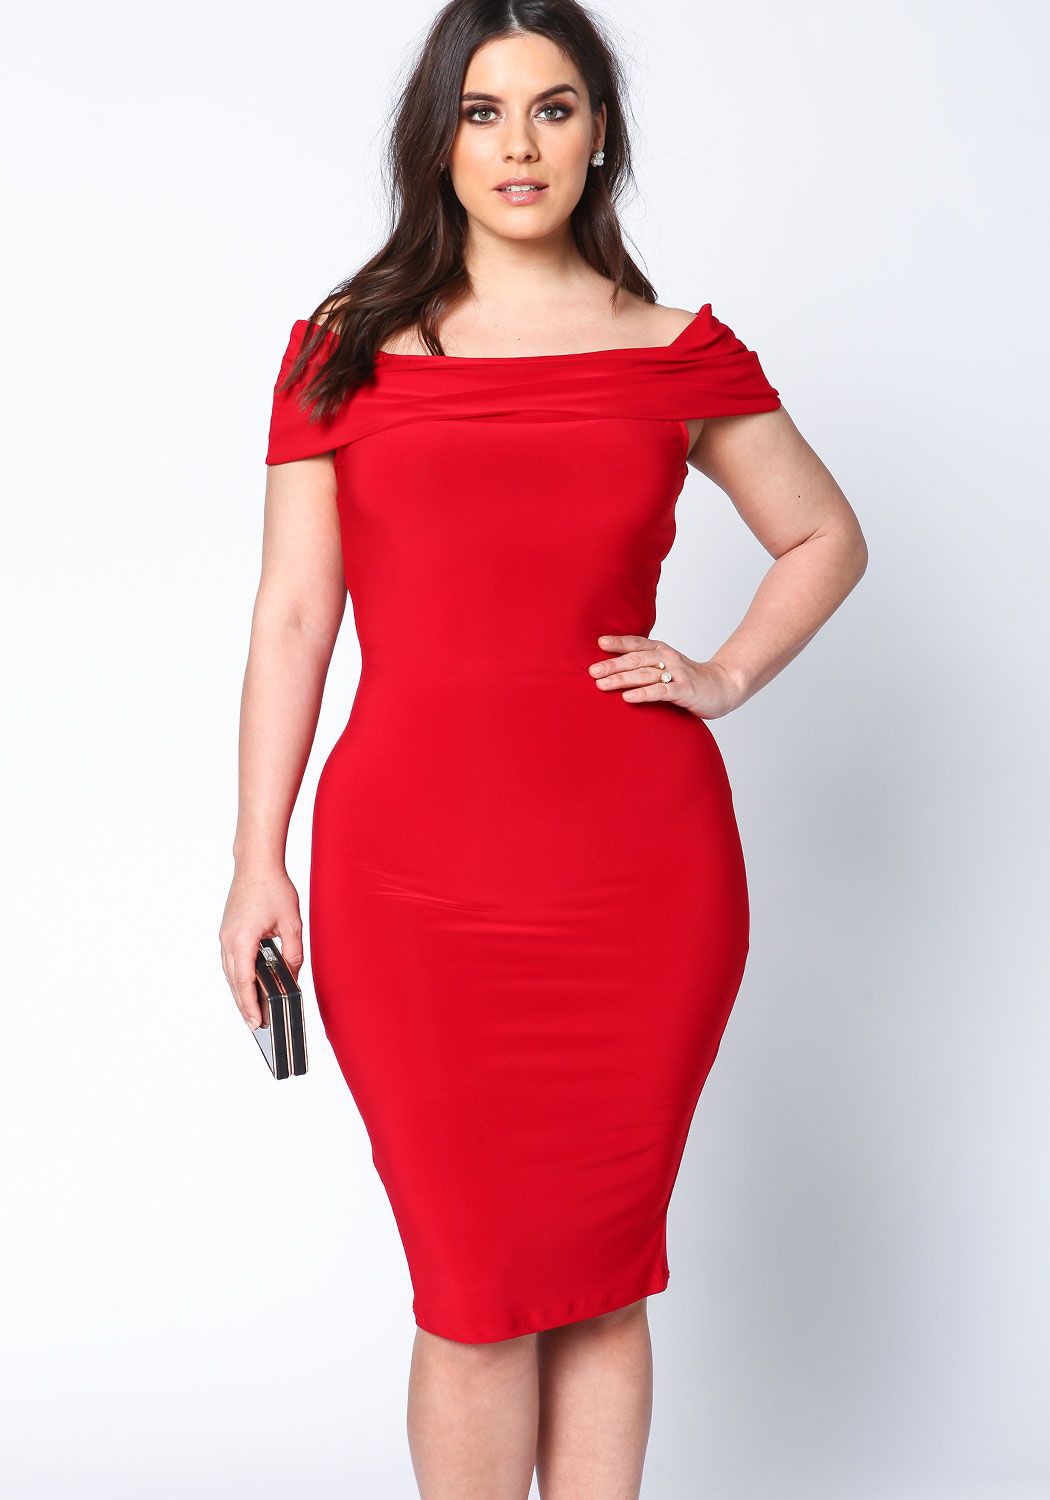 Top Fashion Steals Under $50, Latest Cocktail Dress For Plus Size Ladies: Cocktail Outfits Summer,  Cocktail Party Outfits,  Cocktail Plus-Size Dress,  Plus Size Party Outfits,  Plus Size Cocktail Attire,  Cocktail Party Plus-Size  